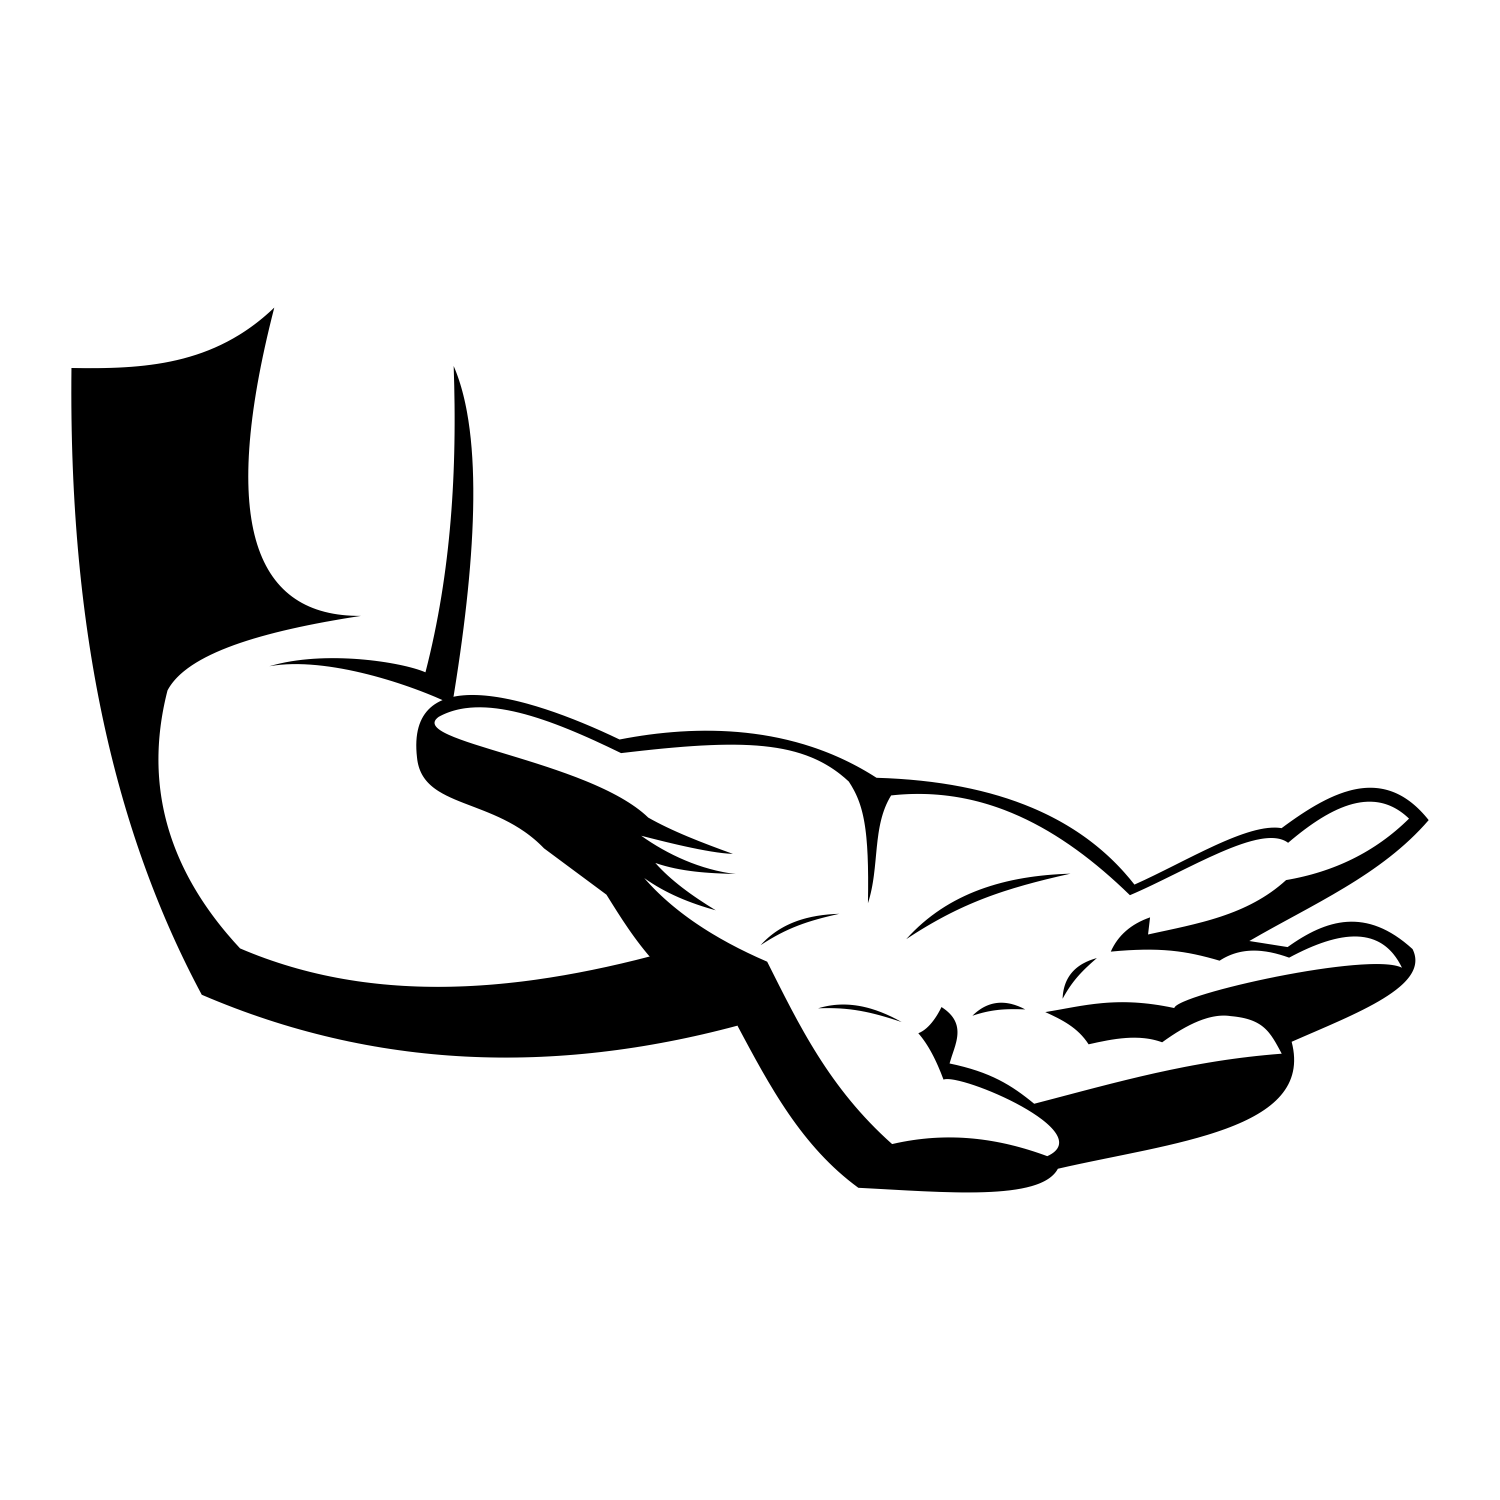 Download Vector for free use: Human hand